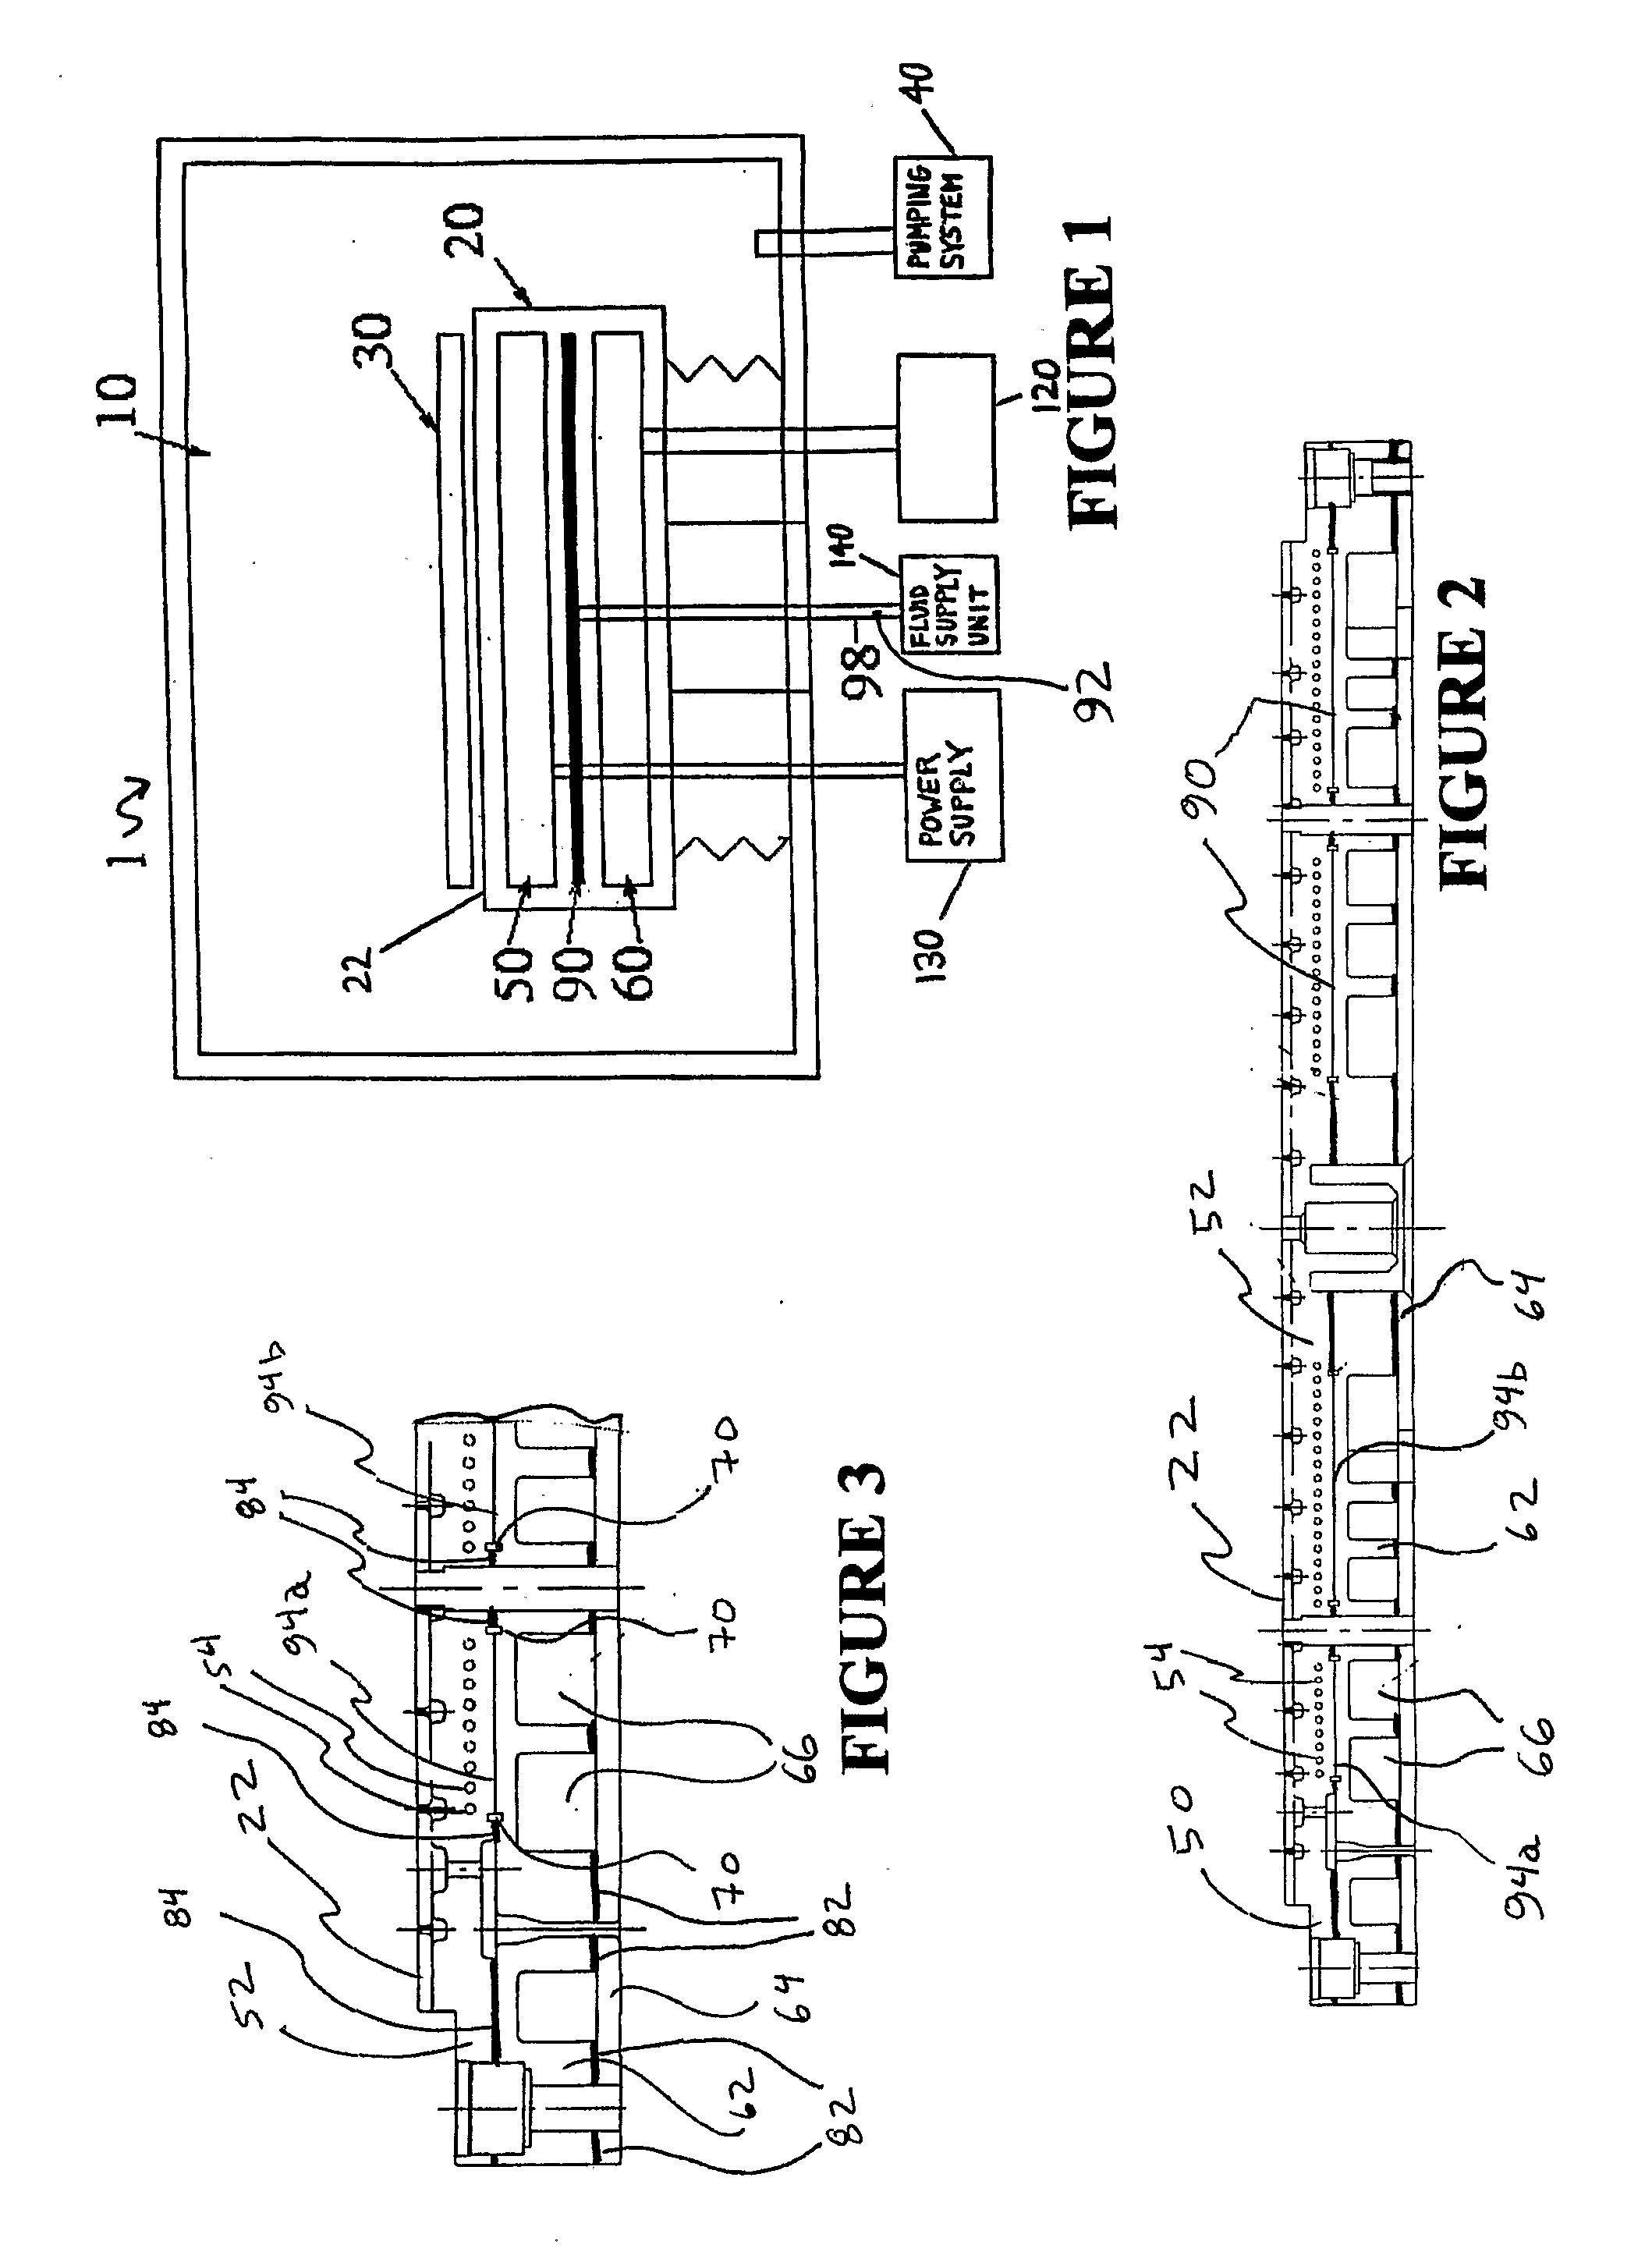 Substrate Holder Having a Fluid Gap and Method of Fabricating the Substrate Holder